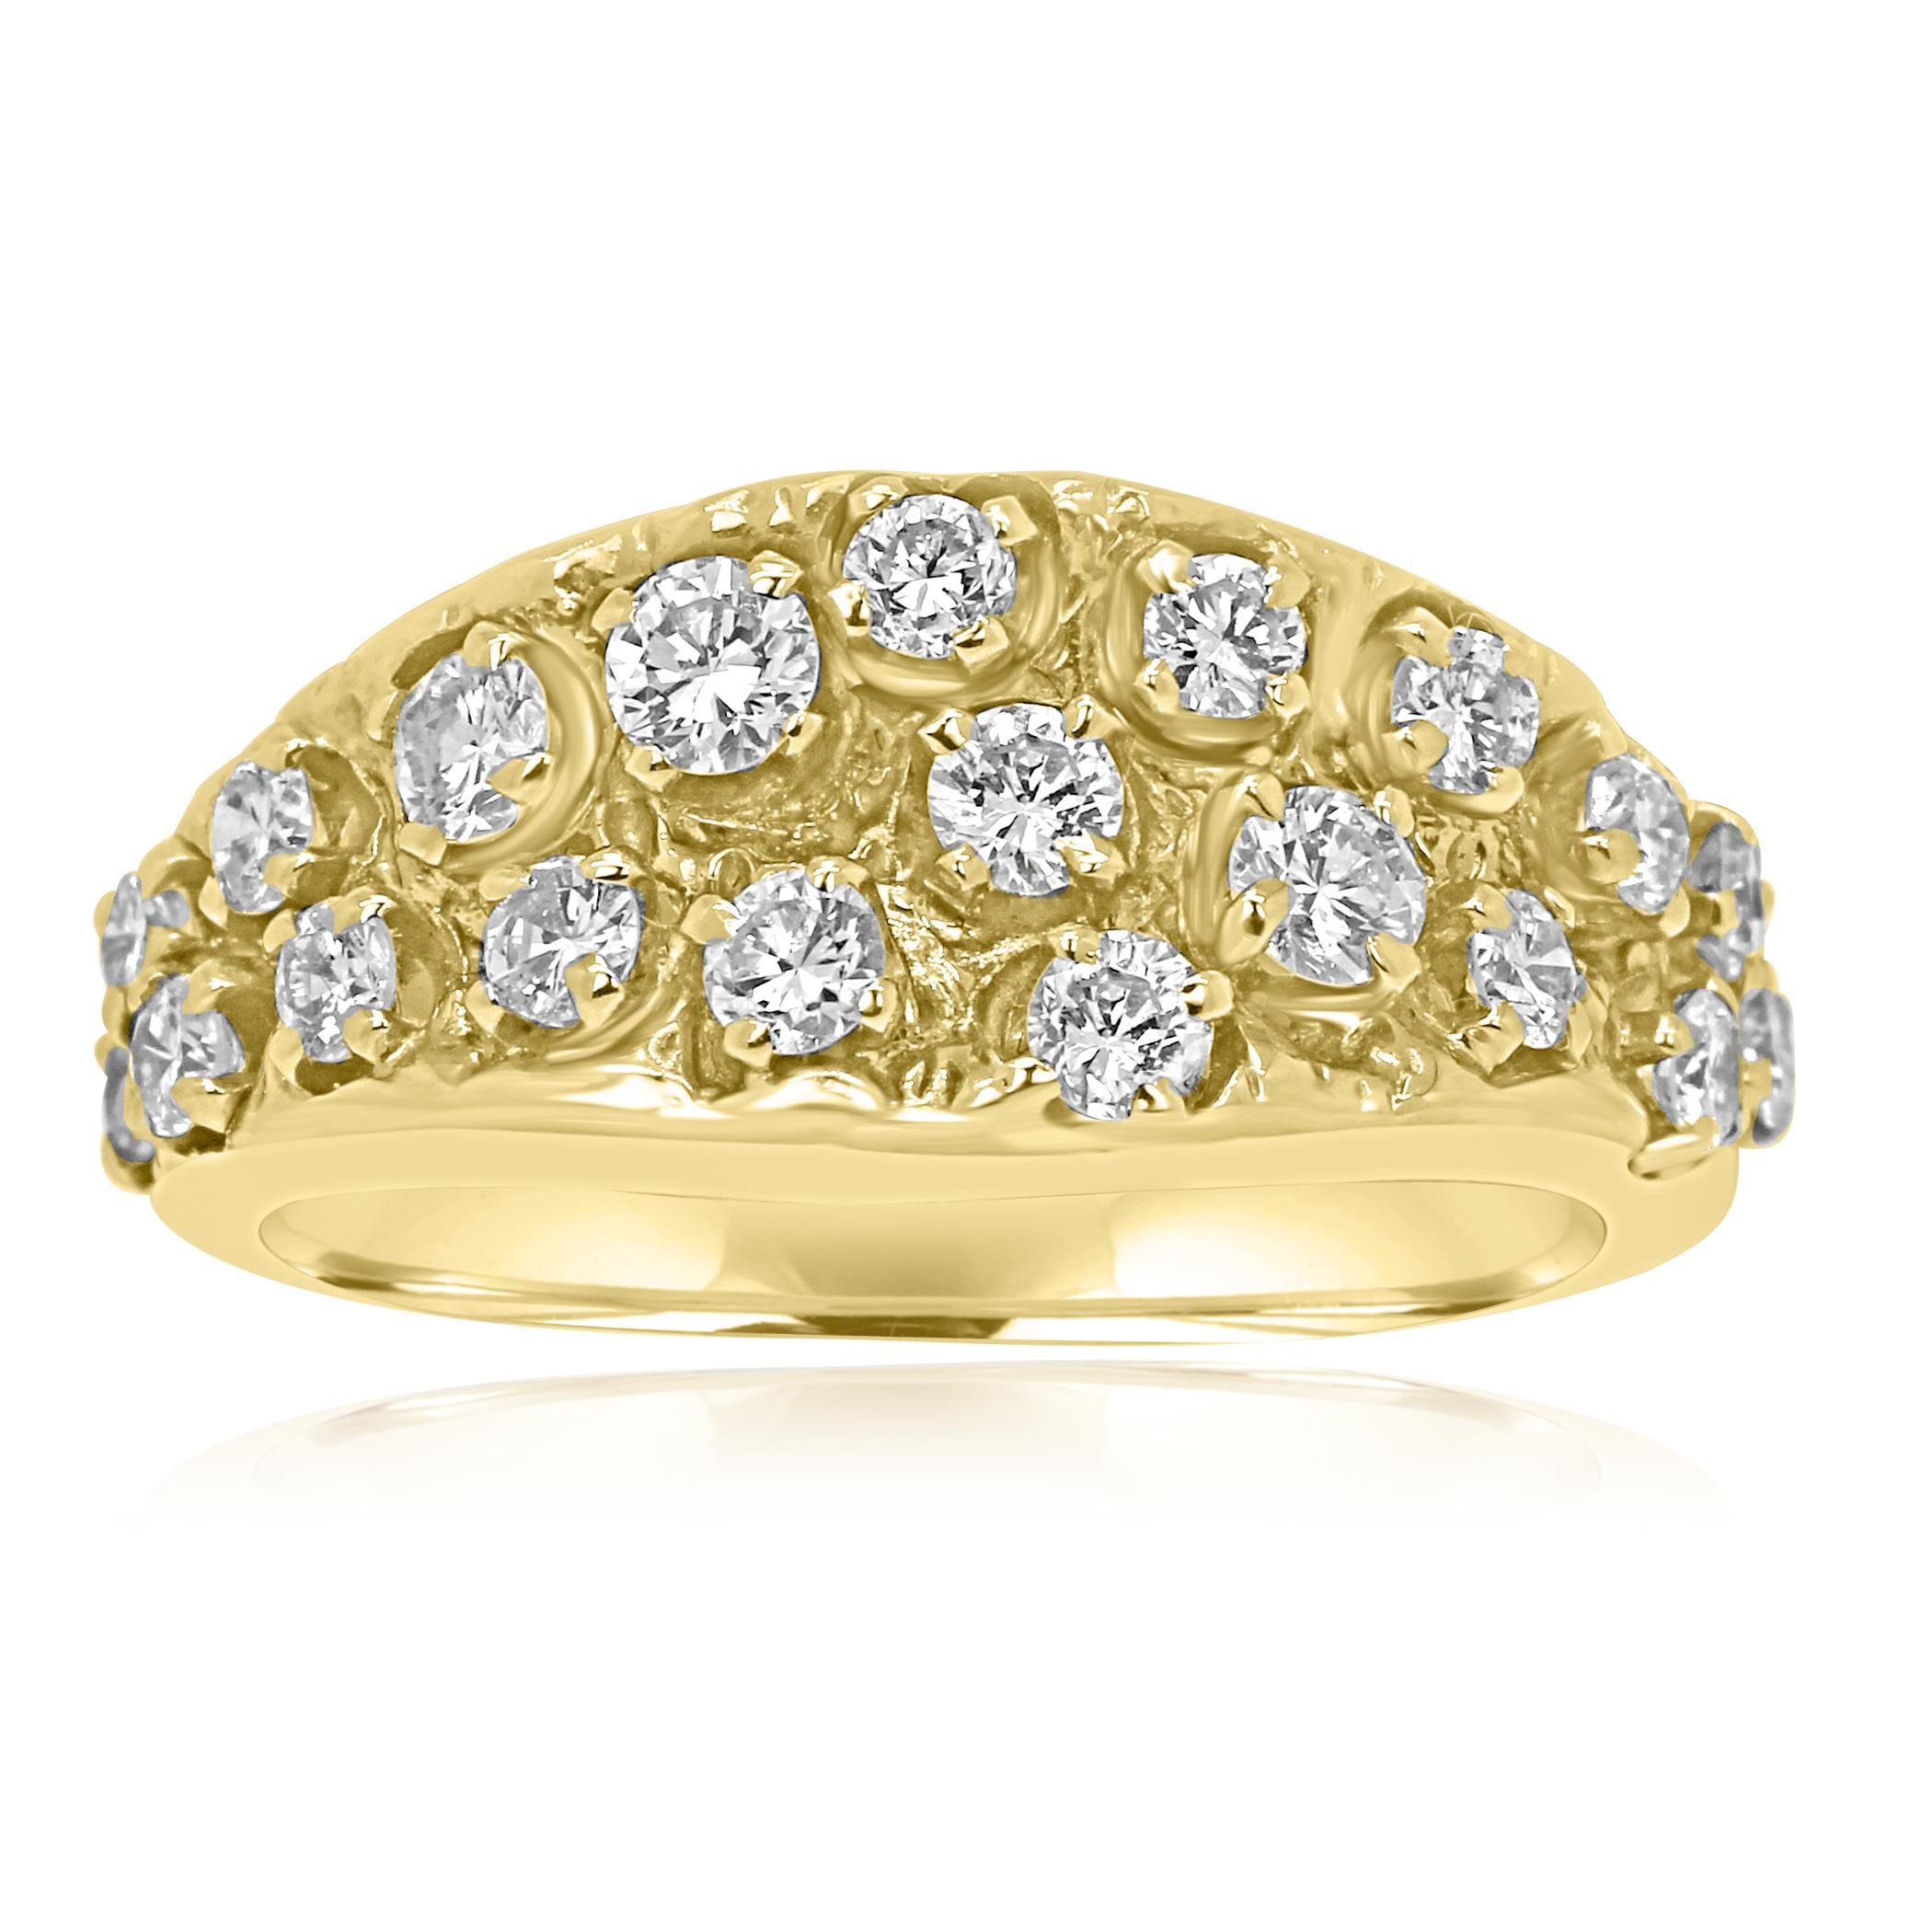 Stunning white G-H Color VS-SI Clarity diamond rounds 1.00 Carat in 14K yellow gold Cocktail Fashion band ring.

Total Weight 1.00 Carat